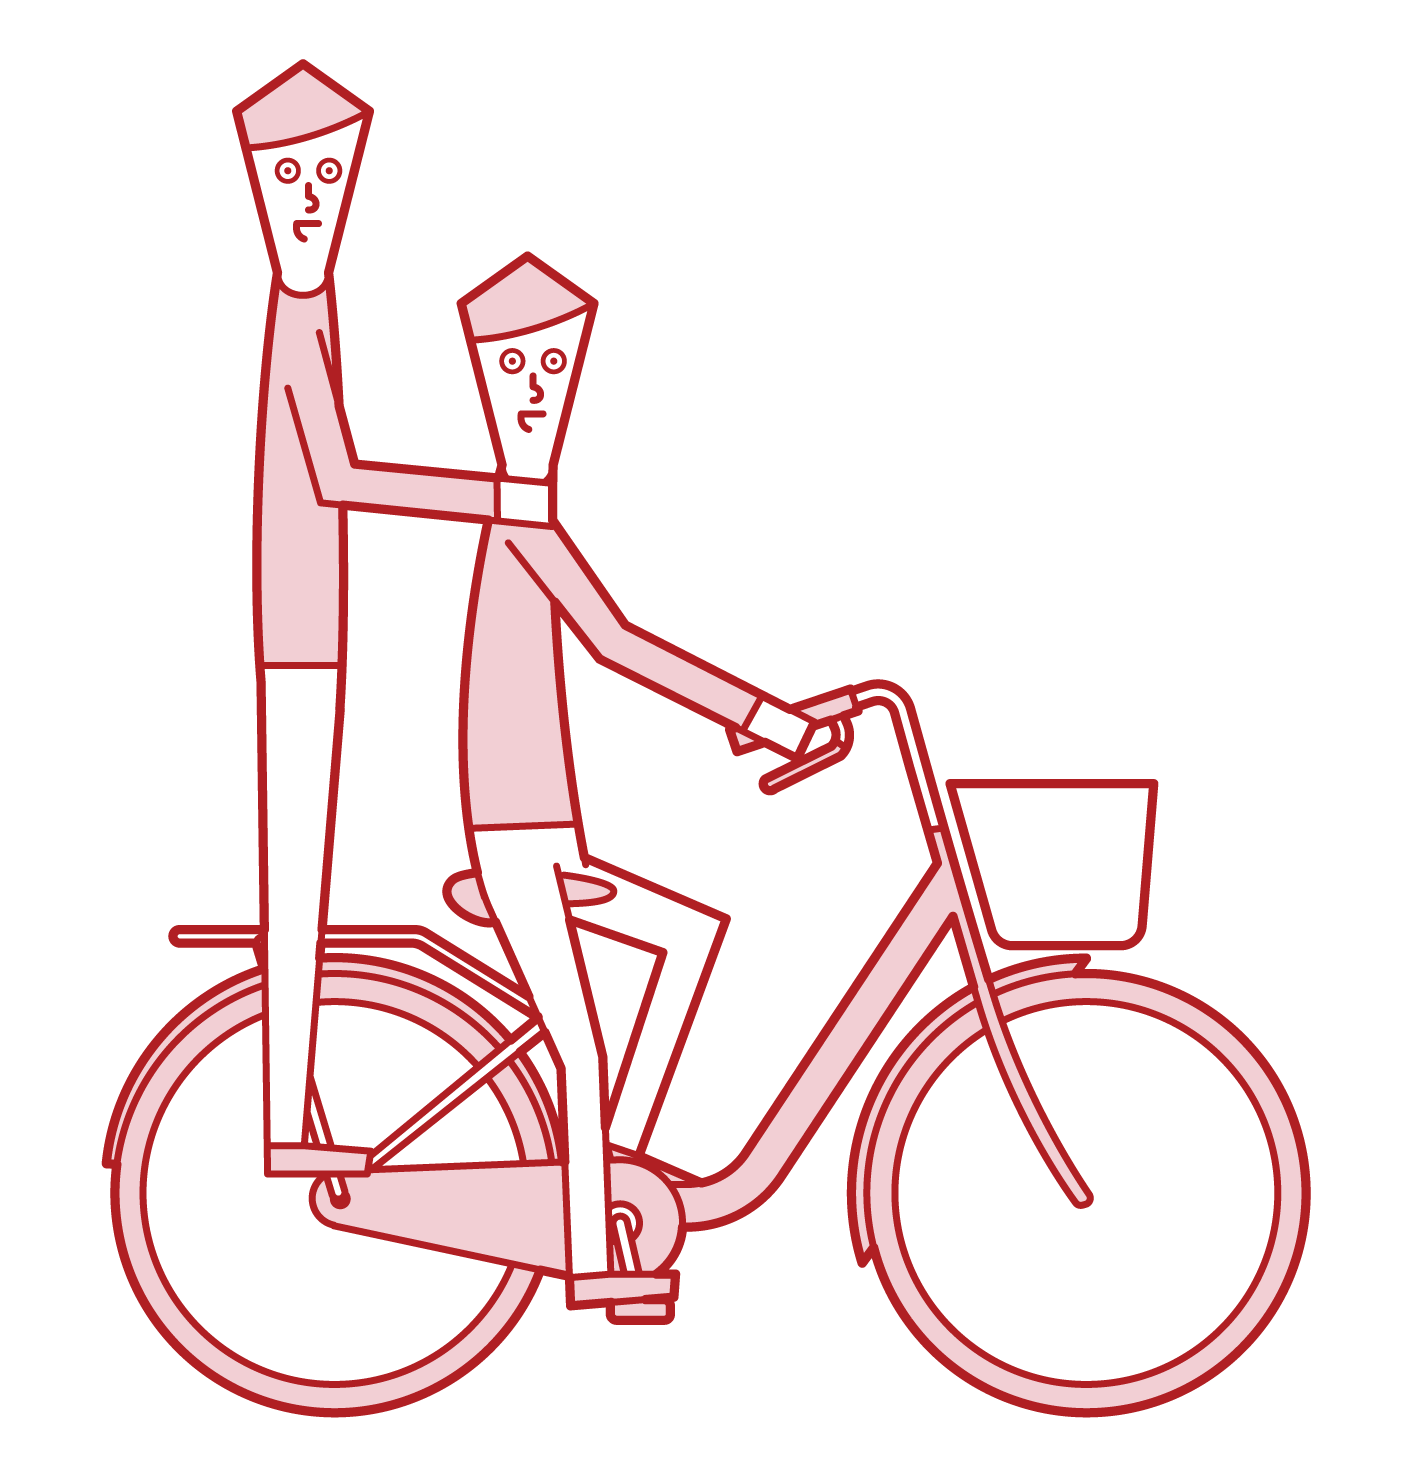 Illustration of two people riding a bicycle